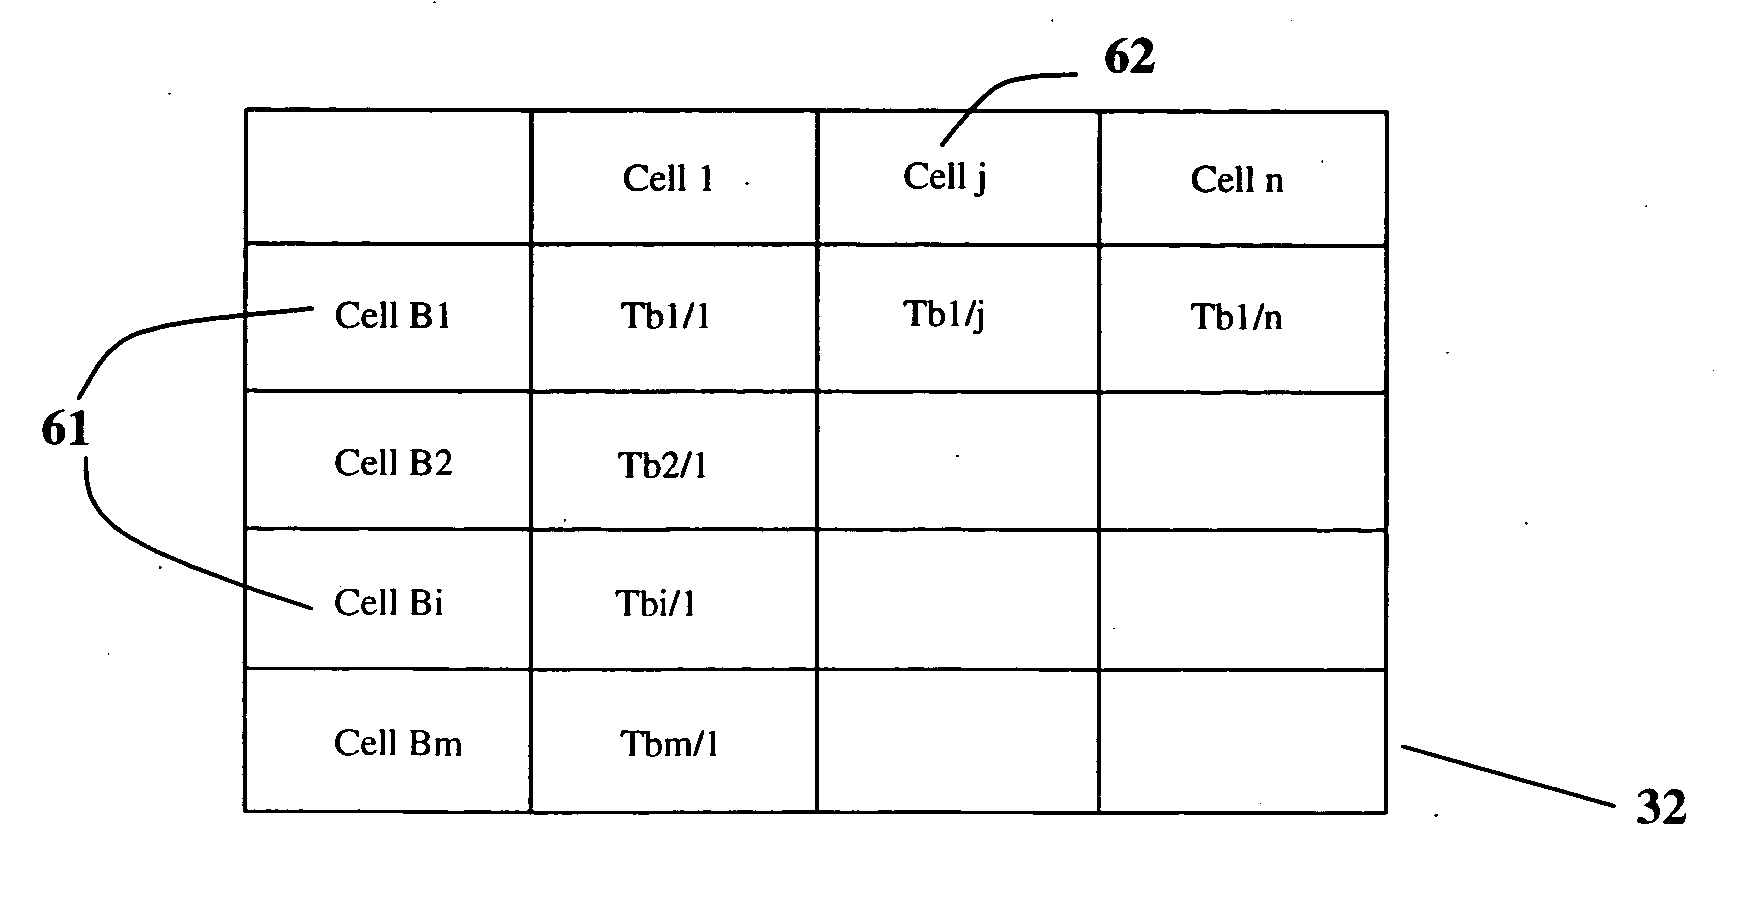 Method of calculating and displaying mutual interference in the down direction in a cellular radiotelephone network with a W-CDMA type access